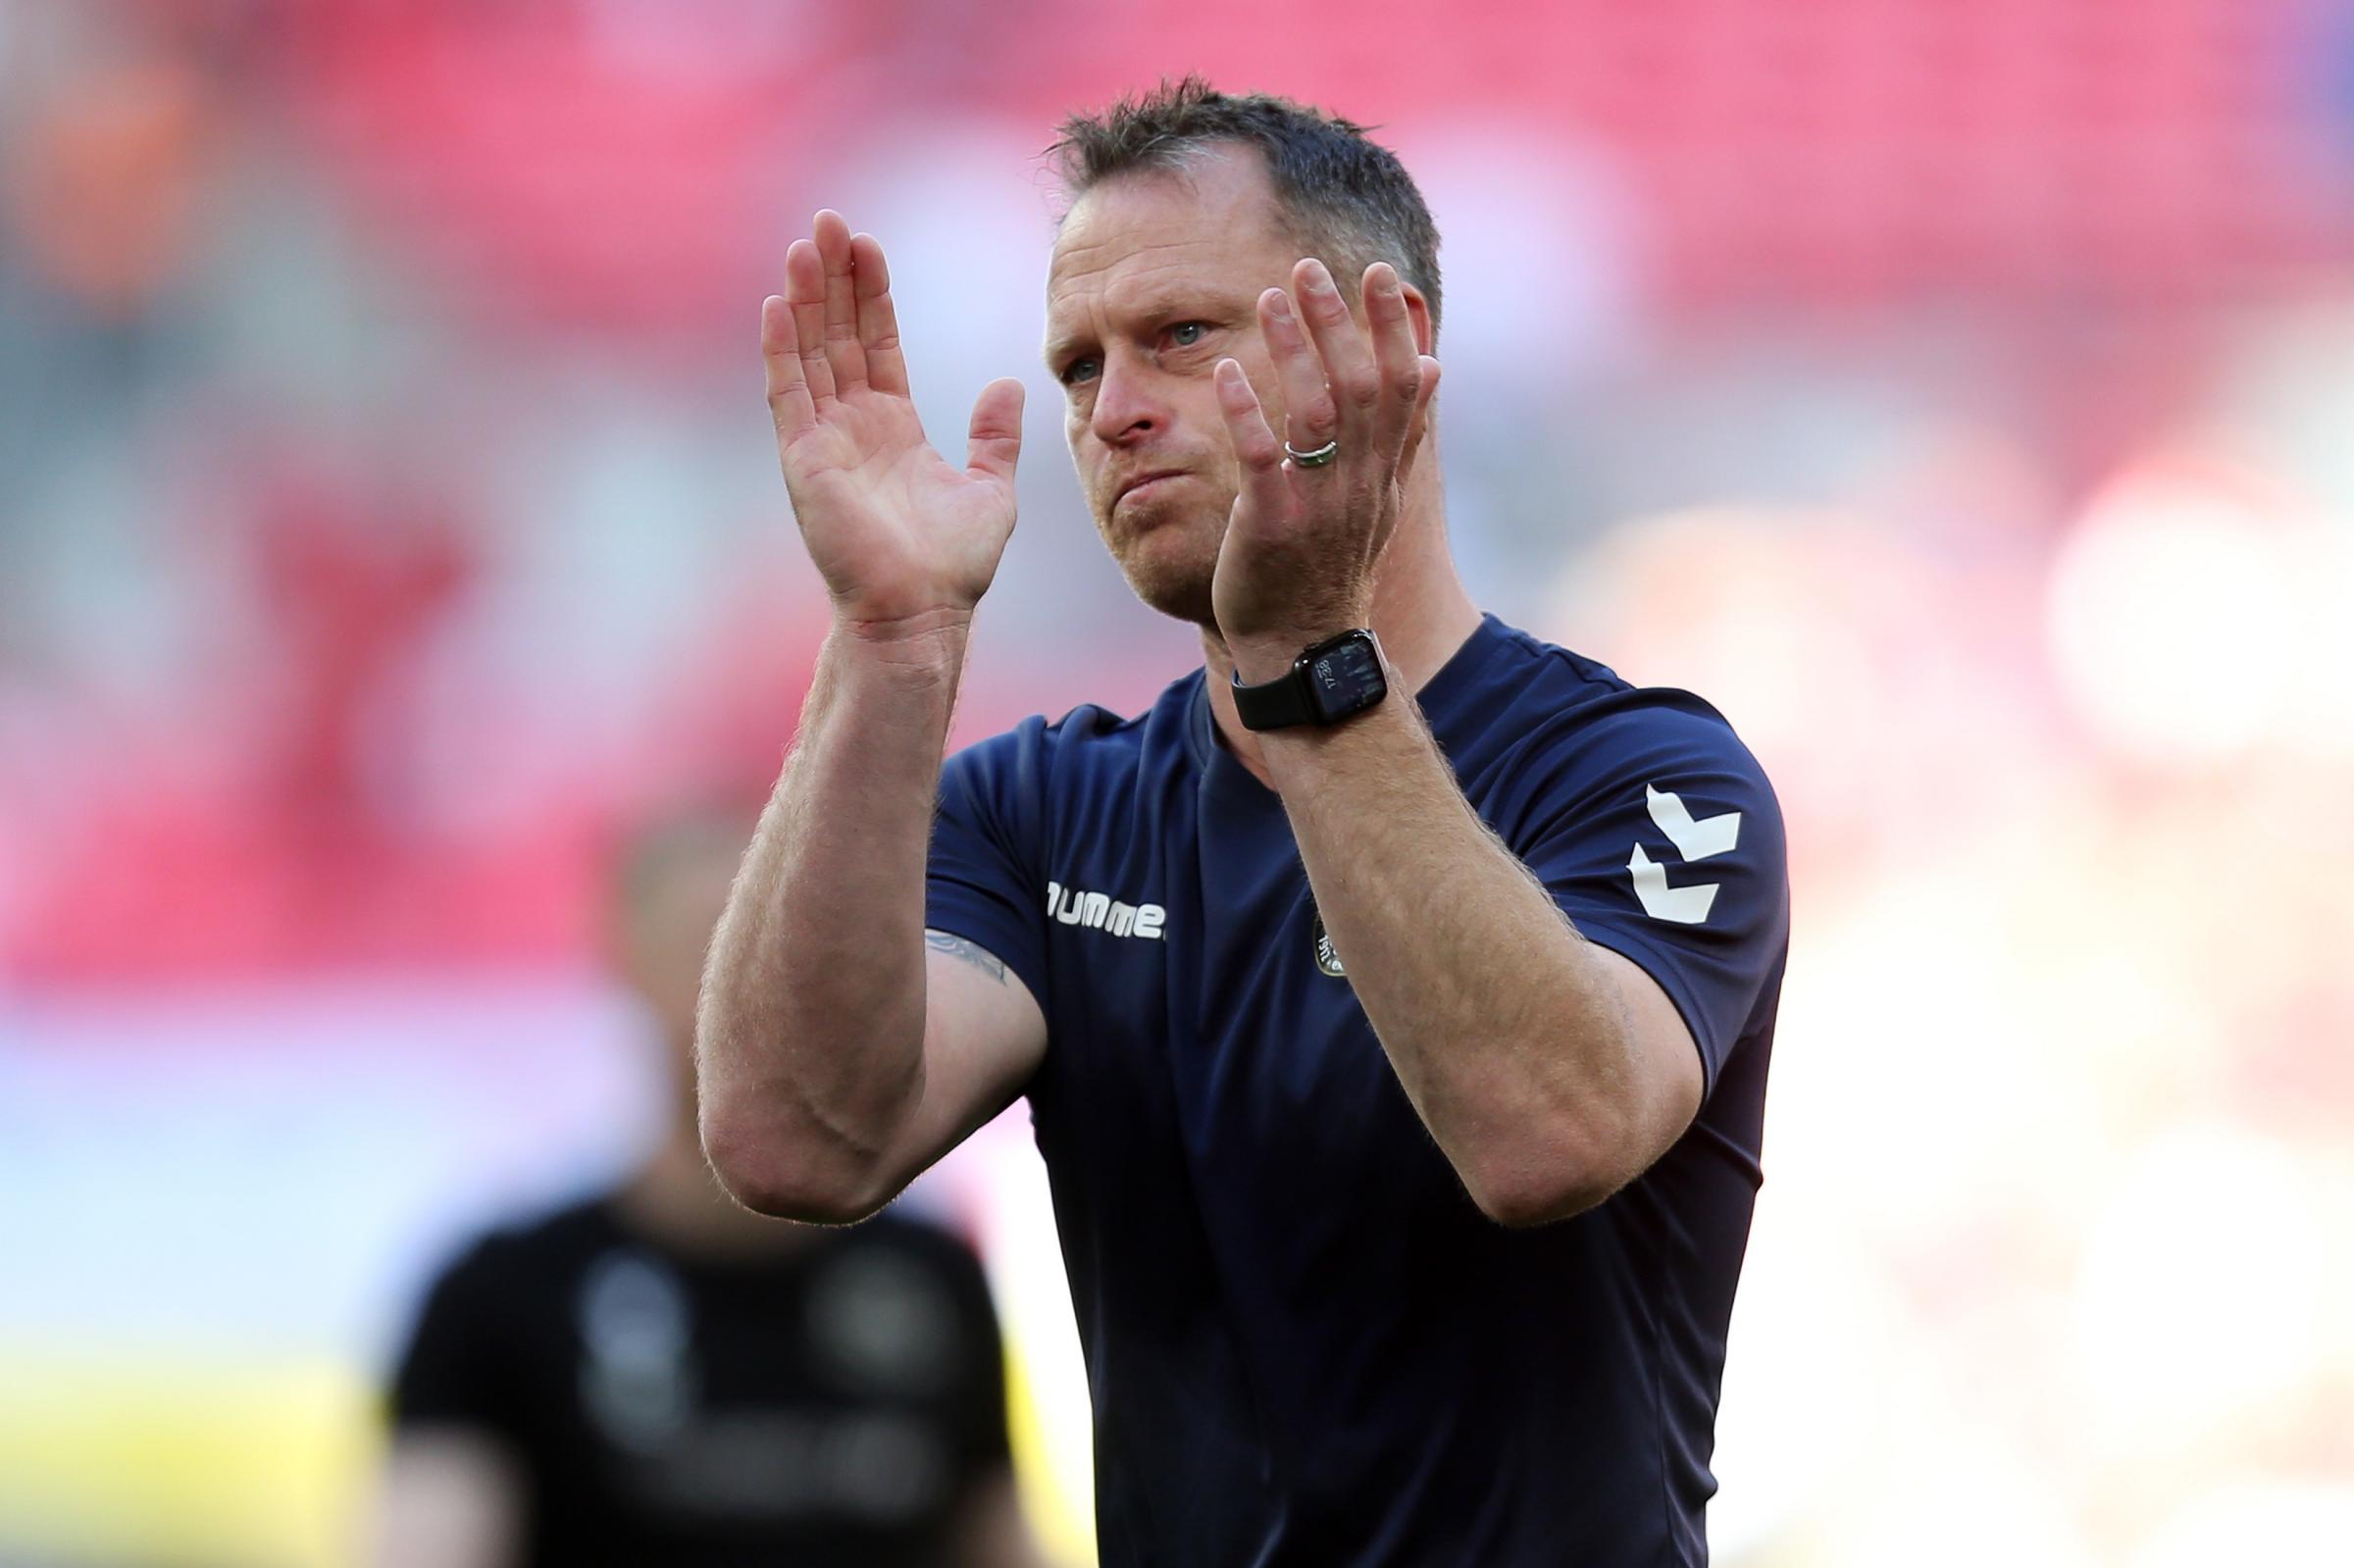 FRUSTRATED: County manager Michael Flynn applauds the fans at Wembley